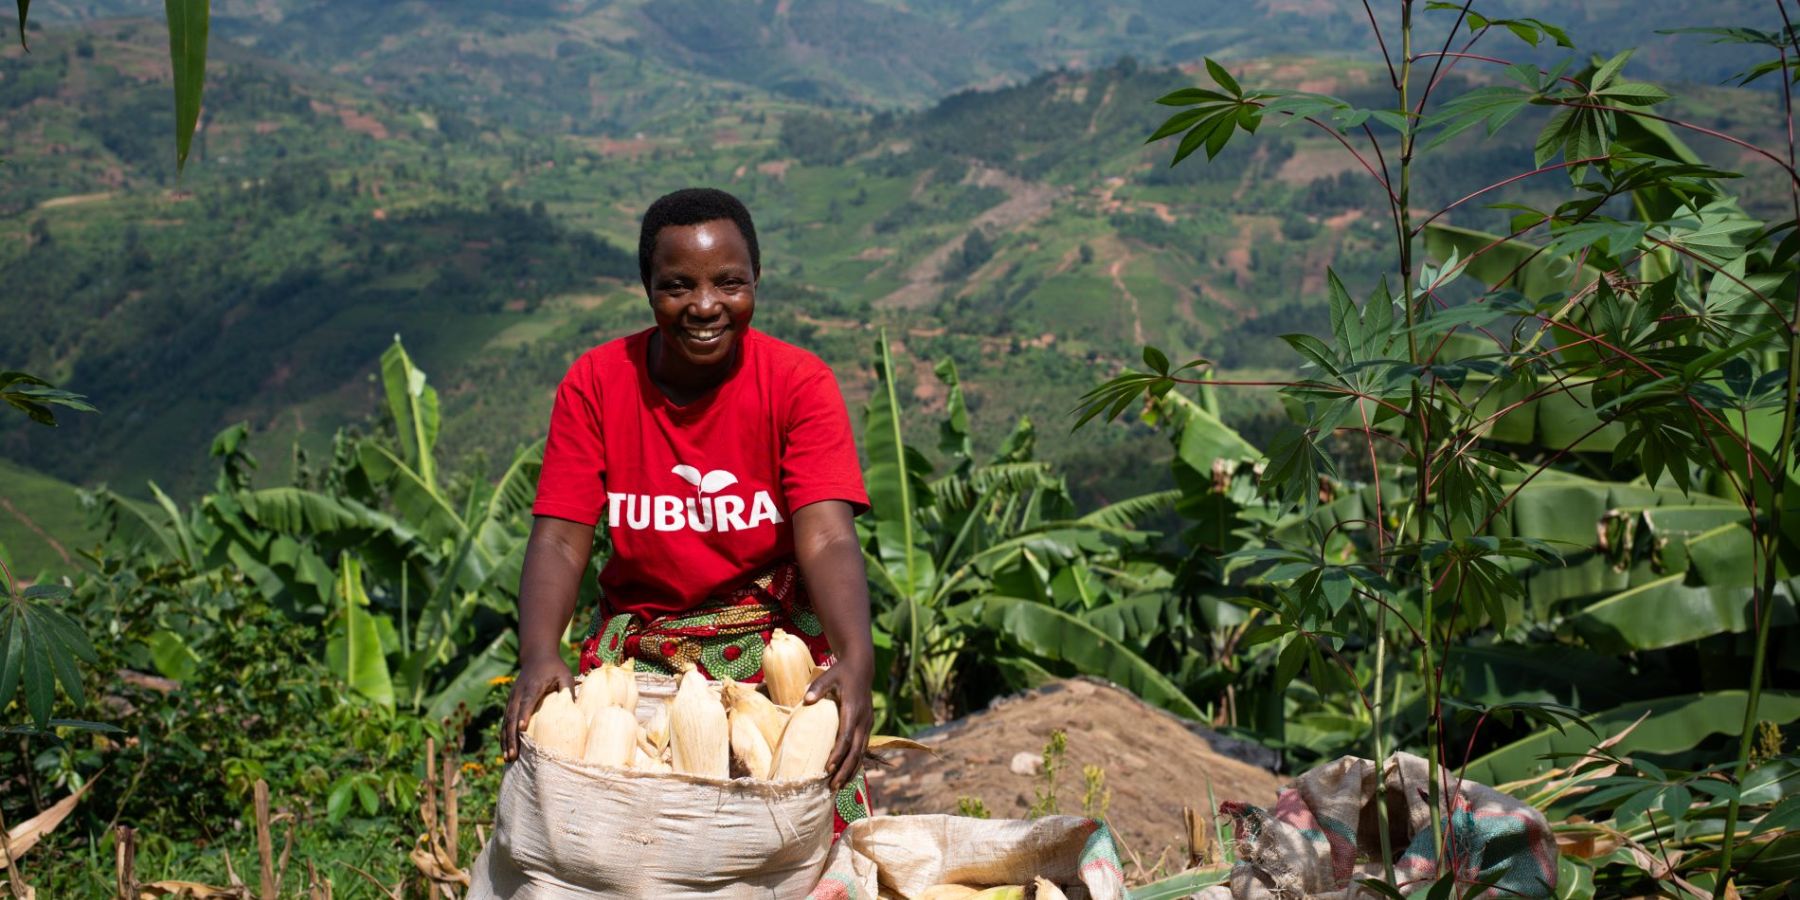 A smallholder farmer smiles in front of her maize harvest in sacks. Behind her are the green hills of Burundi.